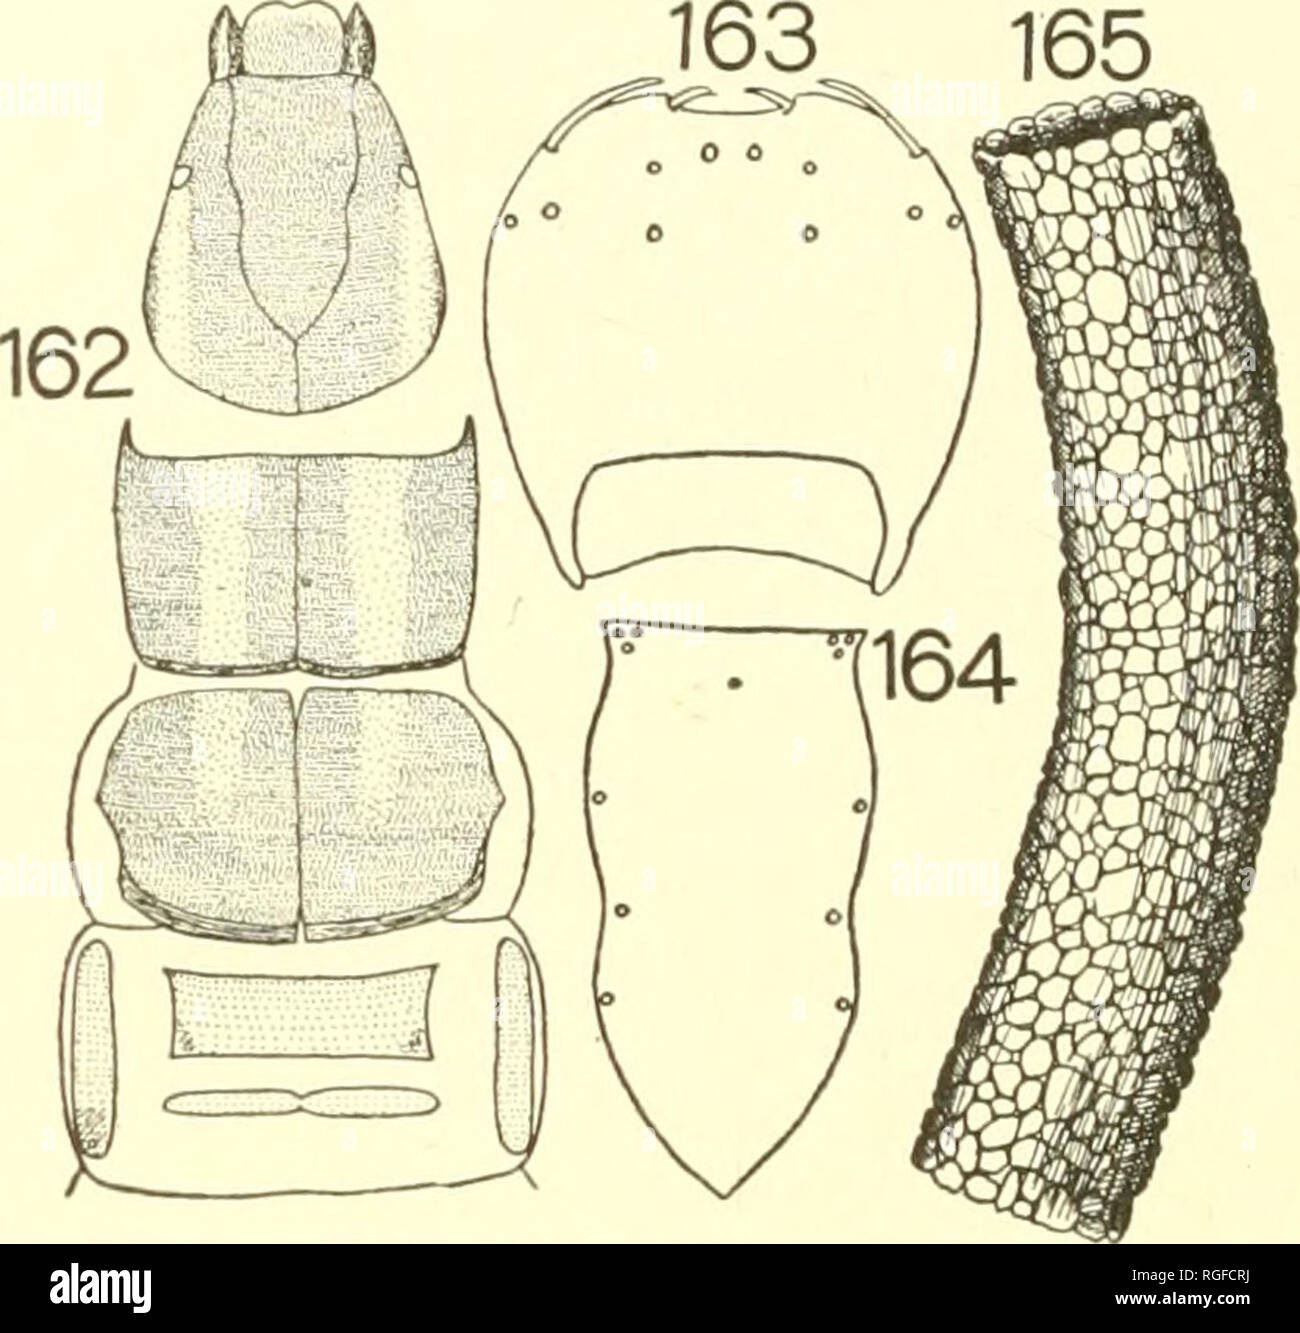 . Bulletin of the Lloyd Library of Botany, Pharmacy and Materia Medica. Botany; Pharmacy; Entomology; Fungi. NORTH AMERICAN CADDIS-FLY LARV-ffi. The Thorax.—The chitinous shield of the pronotum is ex- tended forward in thorn-like form at each cephalic corner. In color the pronotum is deep mahogany-brown, with a broad, lighter- brown line on each side of the median suture. 163 165. PSILOTRETA FRONTALIS. 162. Larva. Head and thorax. 164. Larva. Frons. 163. Larva. Labrum. 165. Case. The shield of the mesonotum is deep mahogany-brown, with a lighter line on each side of the median suture, which, i Stock Photo